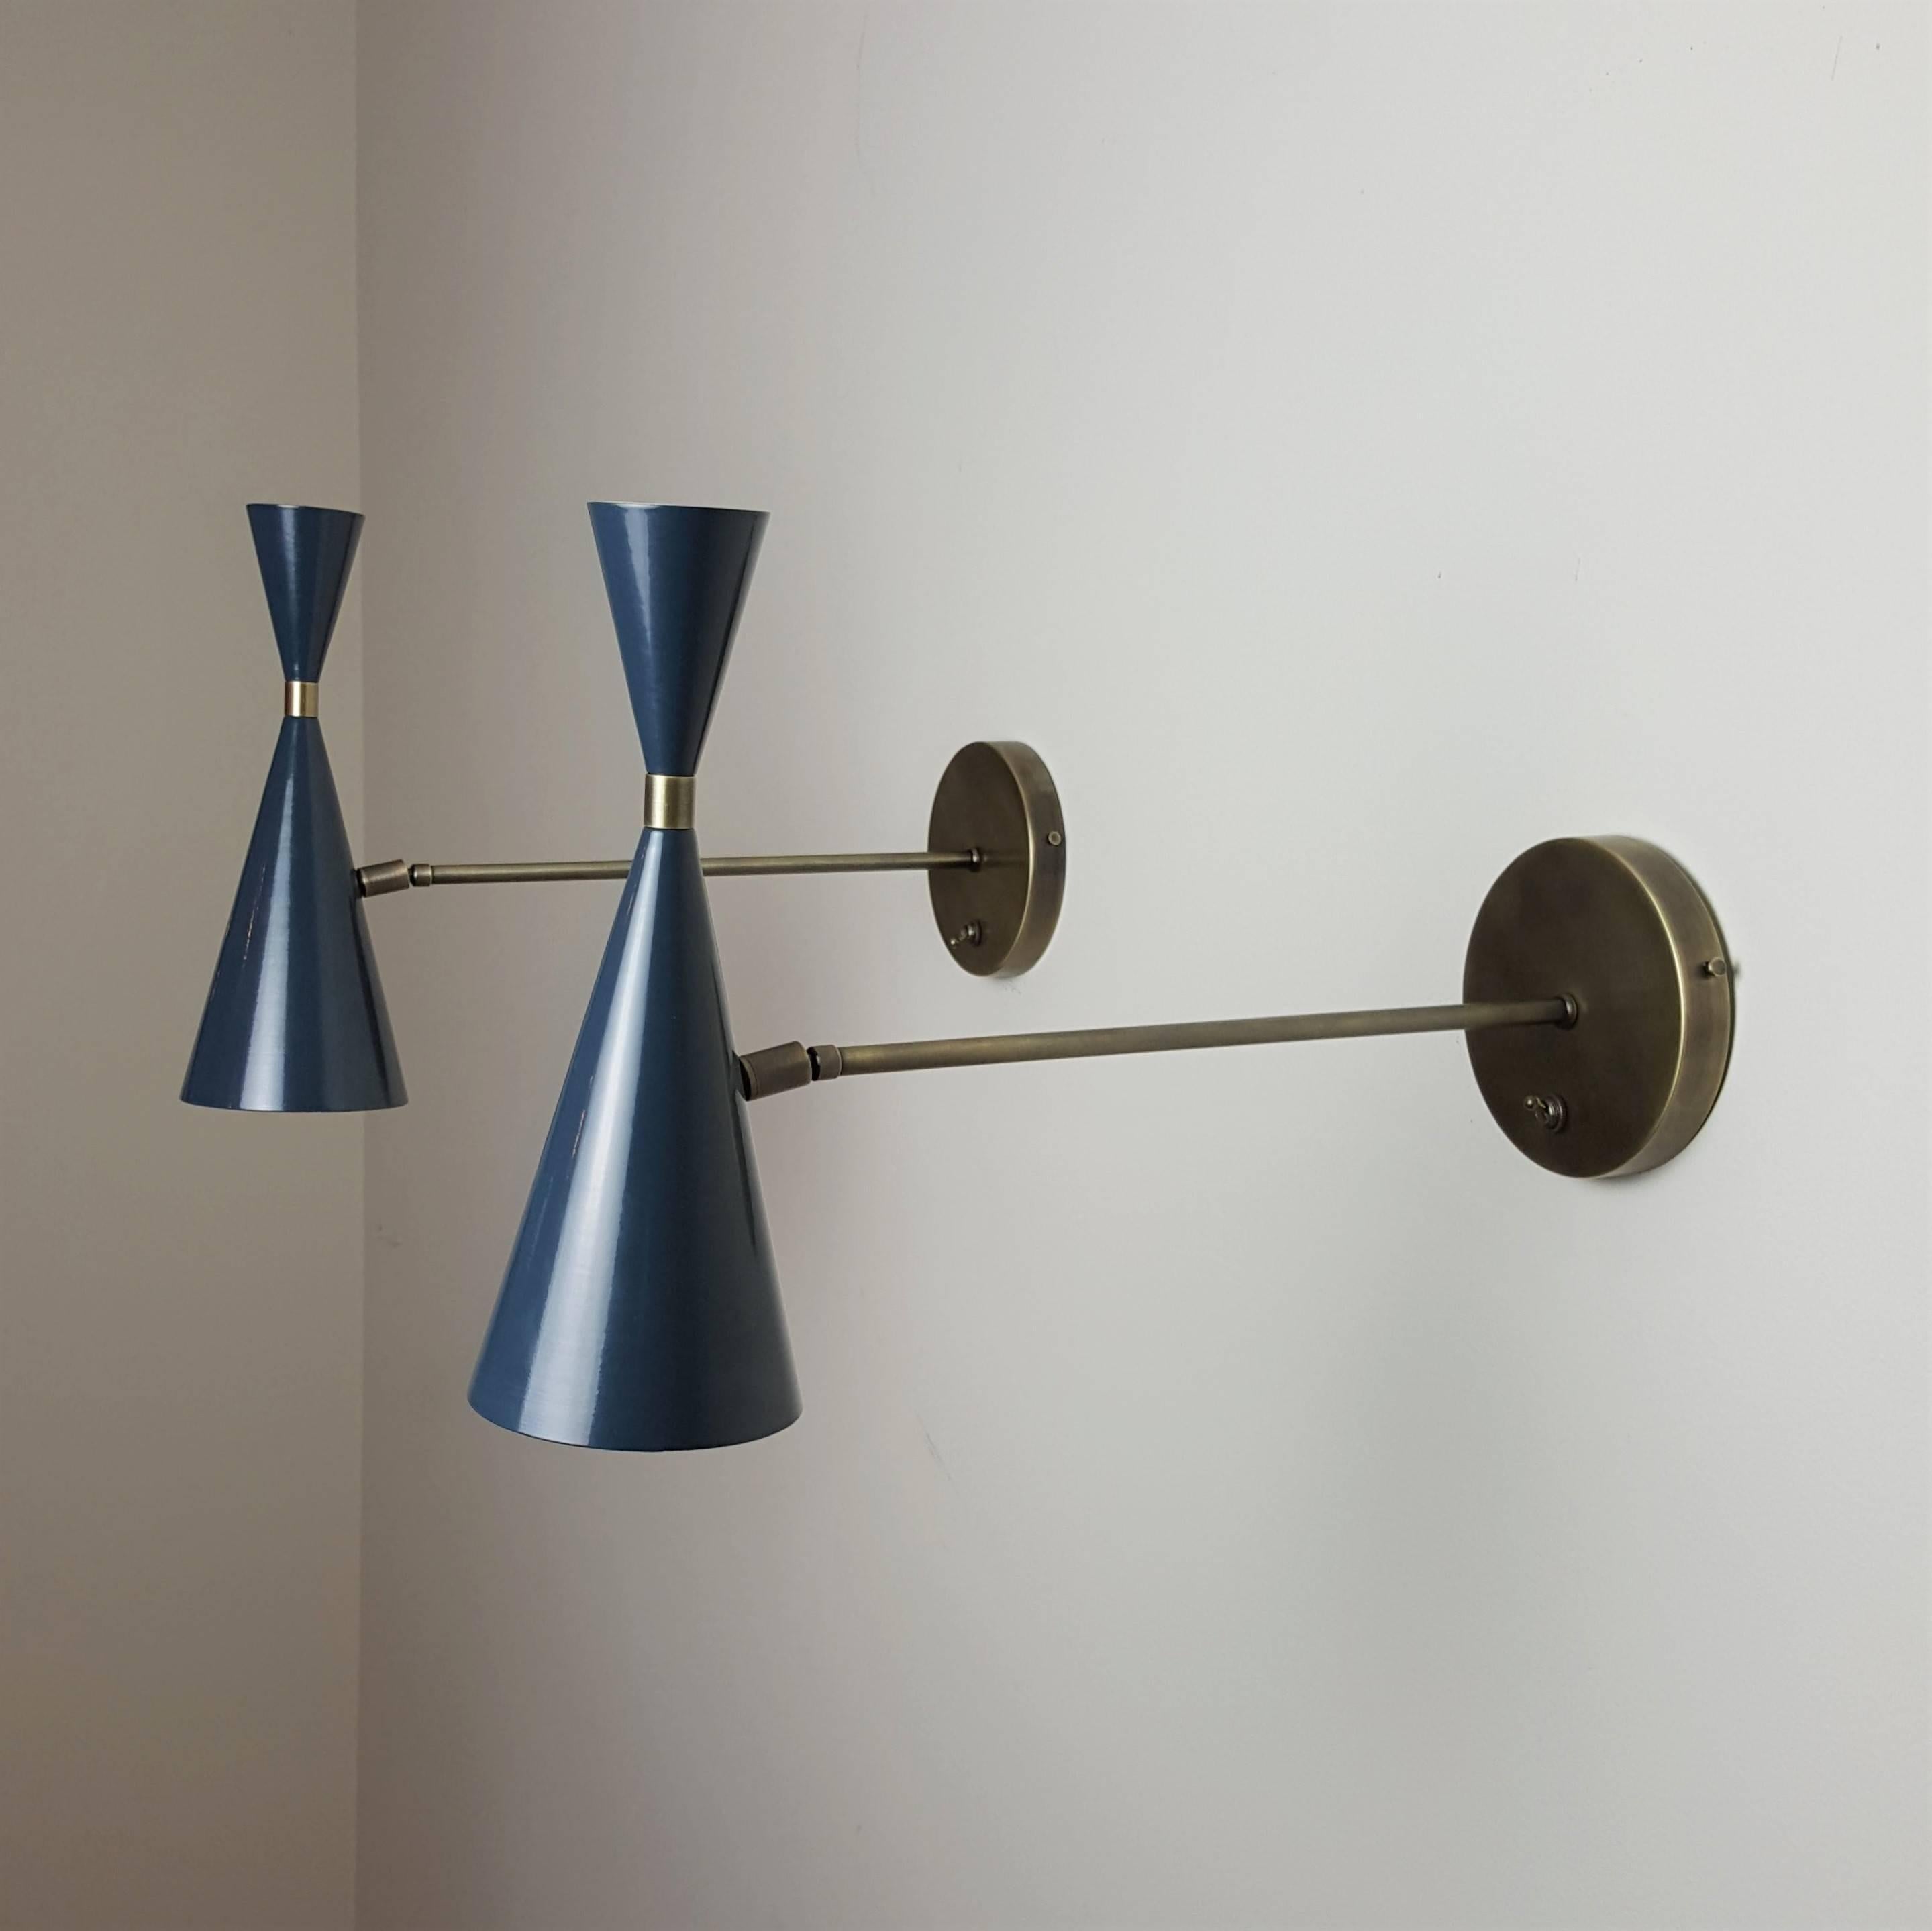 Handcrafted in NYC by Blueprint Lighting, these monopoint electrified sconces or reading lamps are priced per piece and may be ordered in any quantity. Fabricated with only the highest quality materials--substantial, solid construction. Gorgeous as